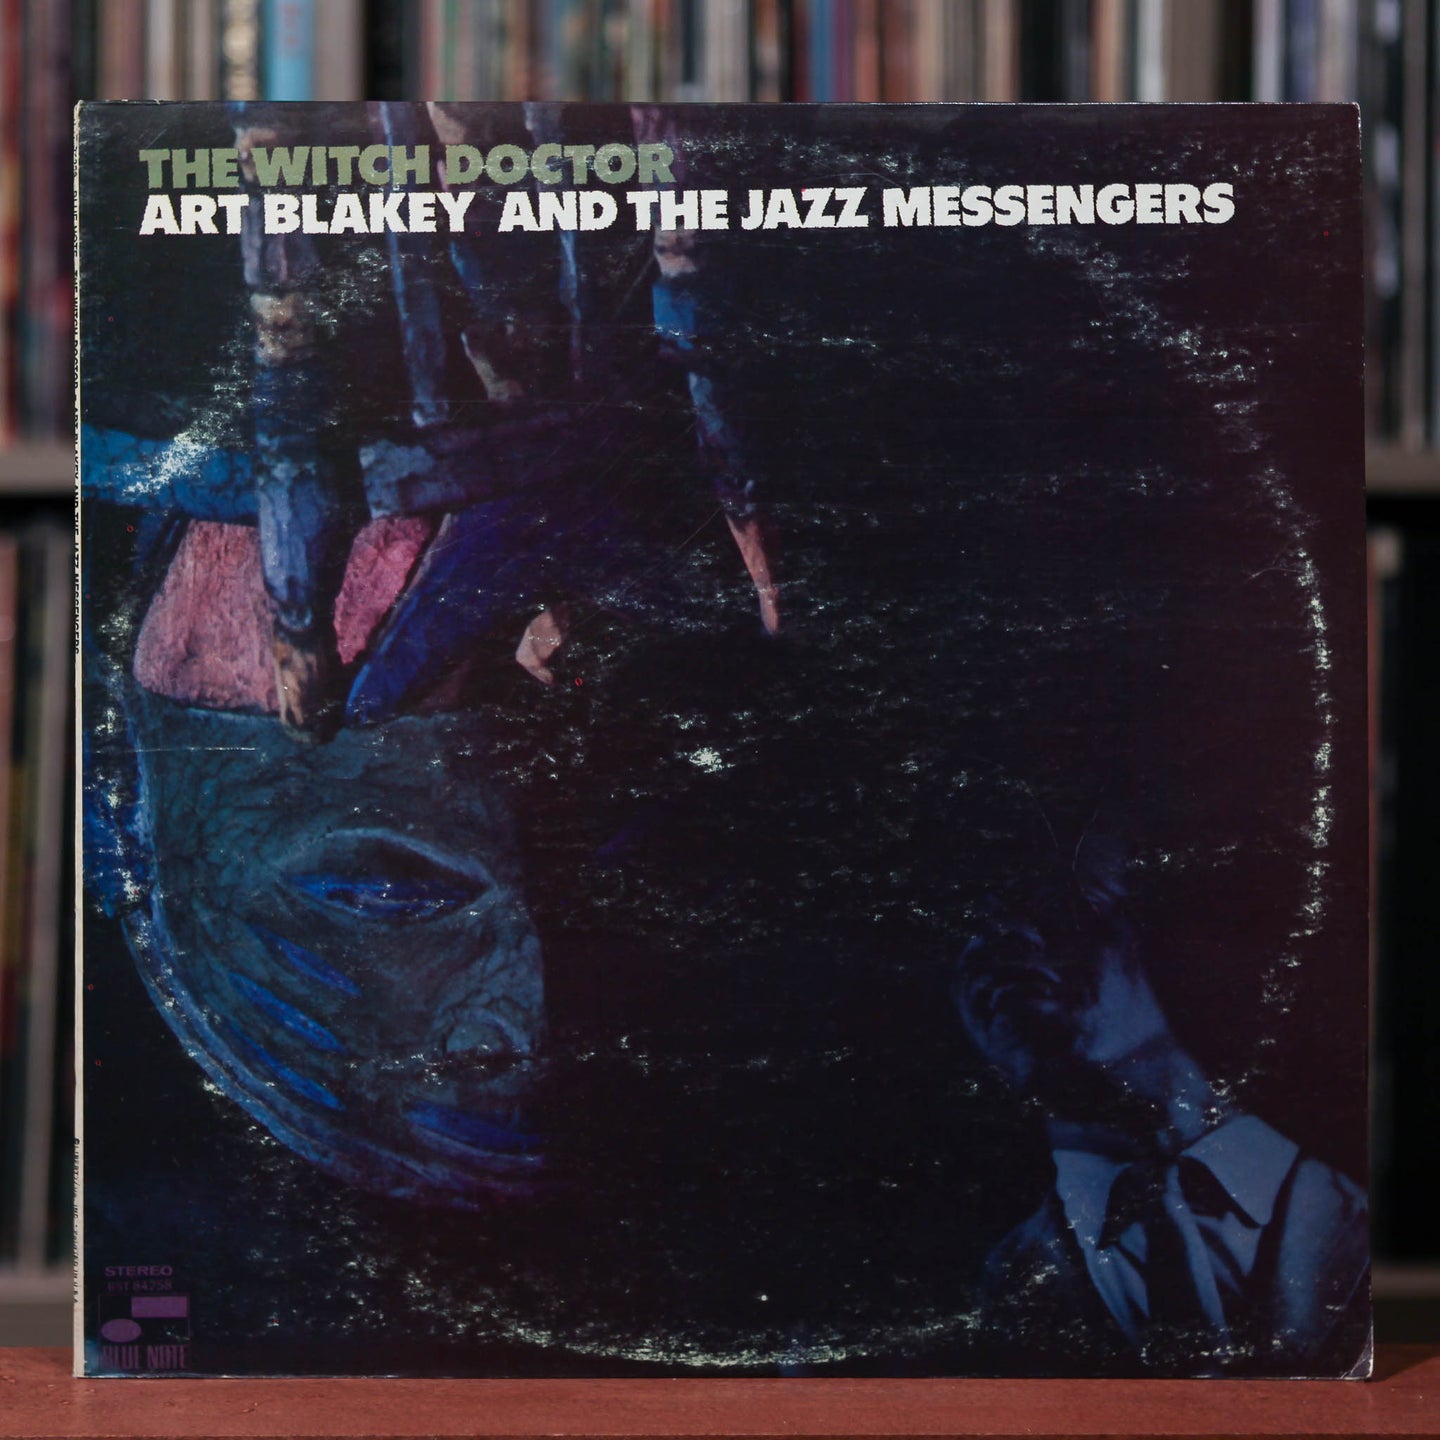 Art Blakey & The Jazz Messengers - The Witch Doctor - 1967 Blue Note